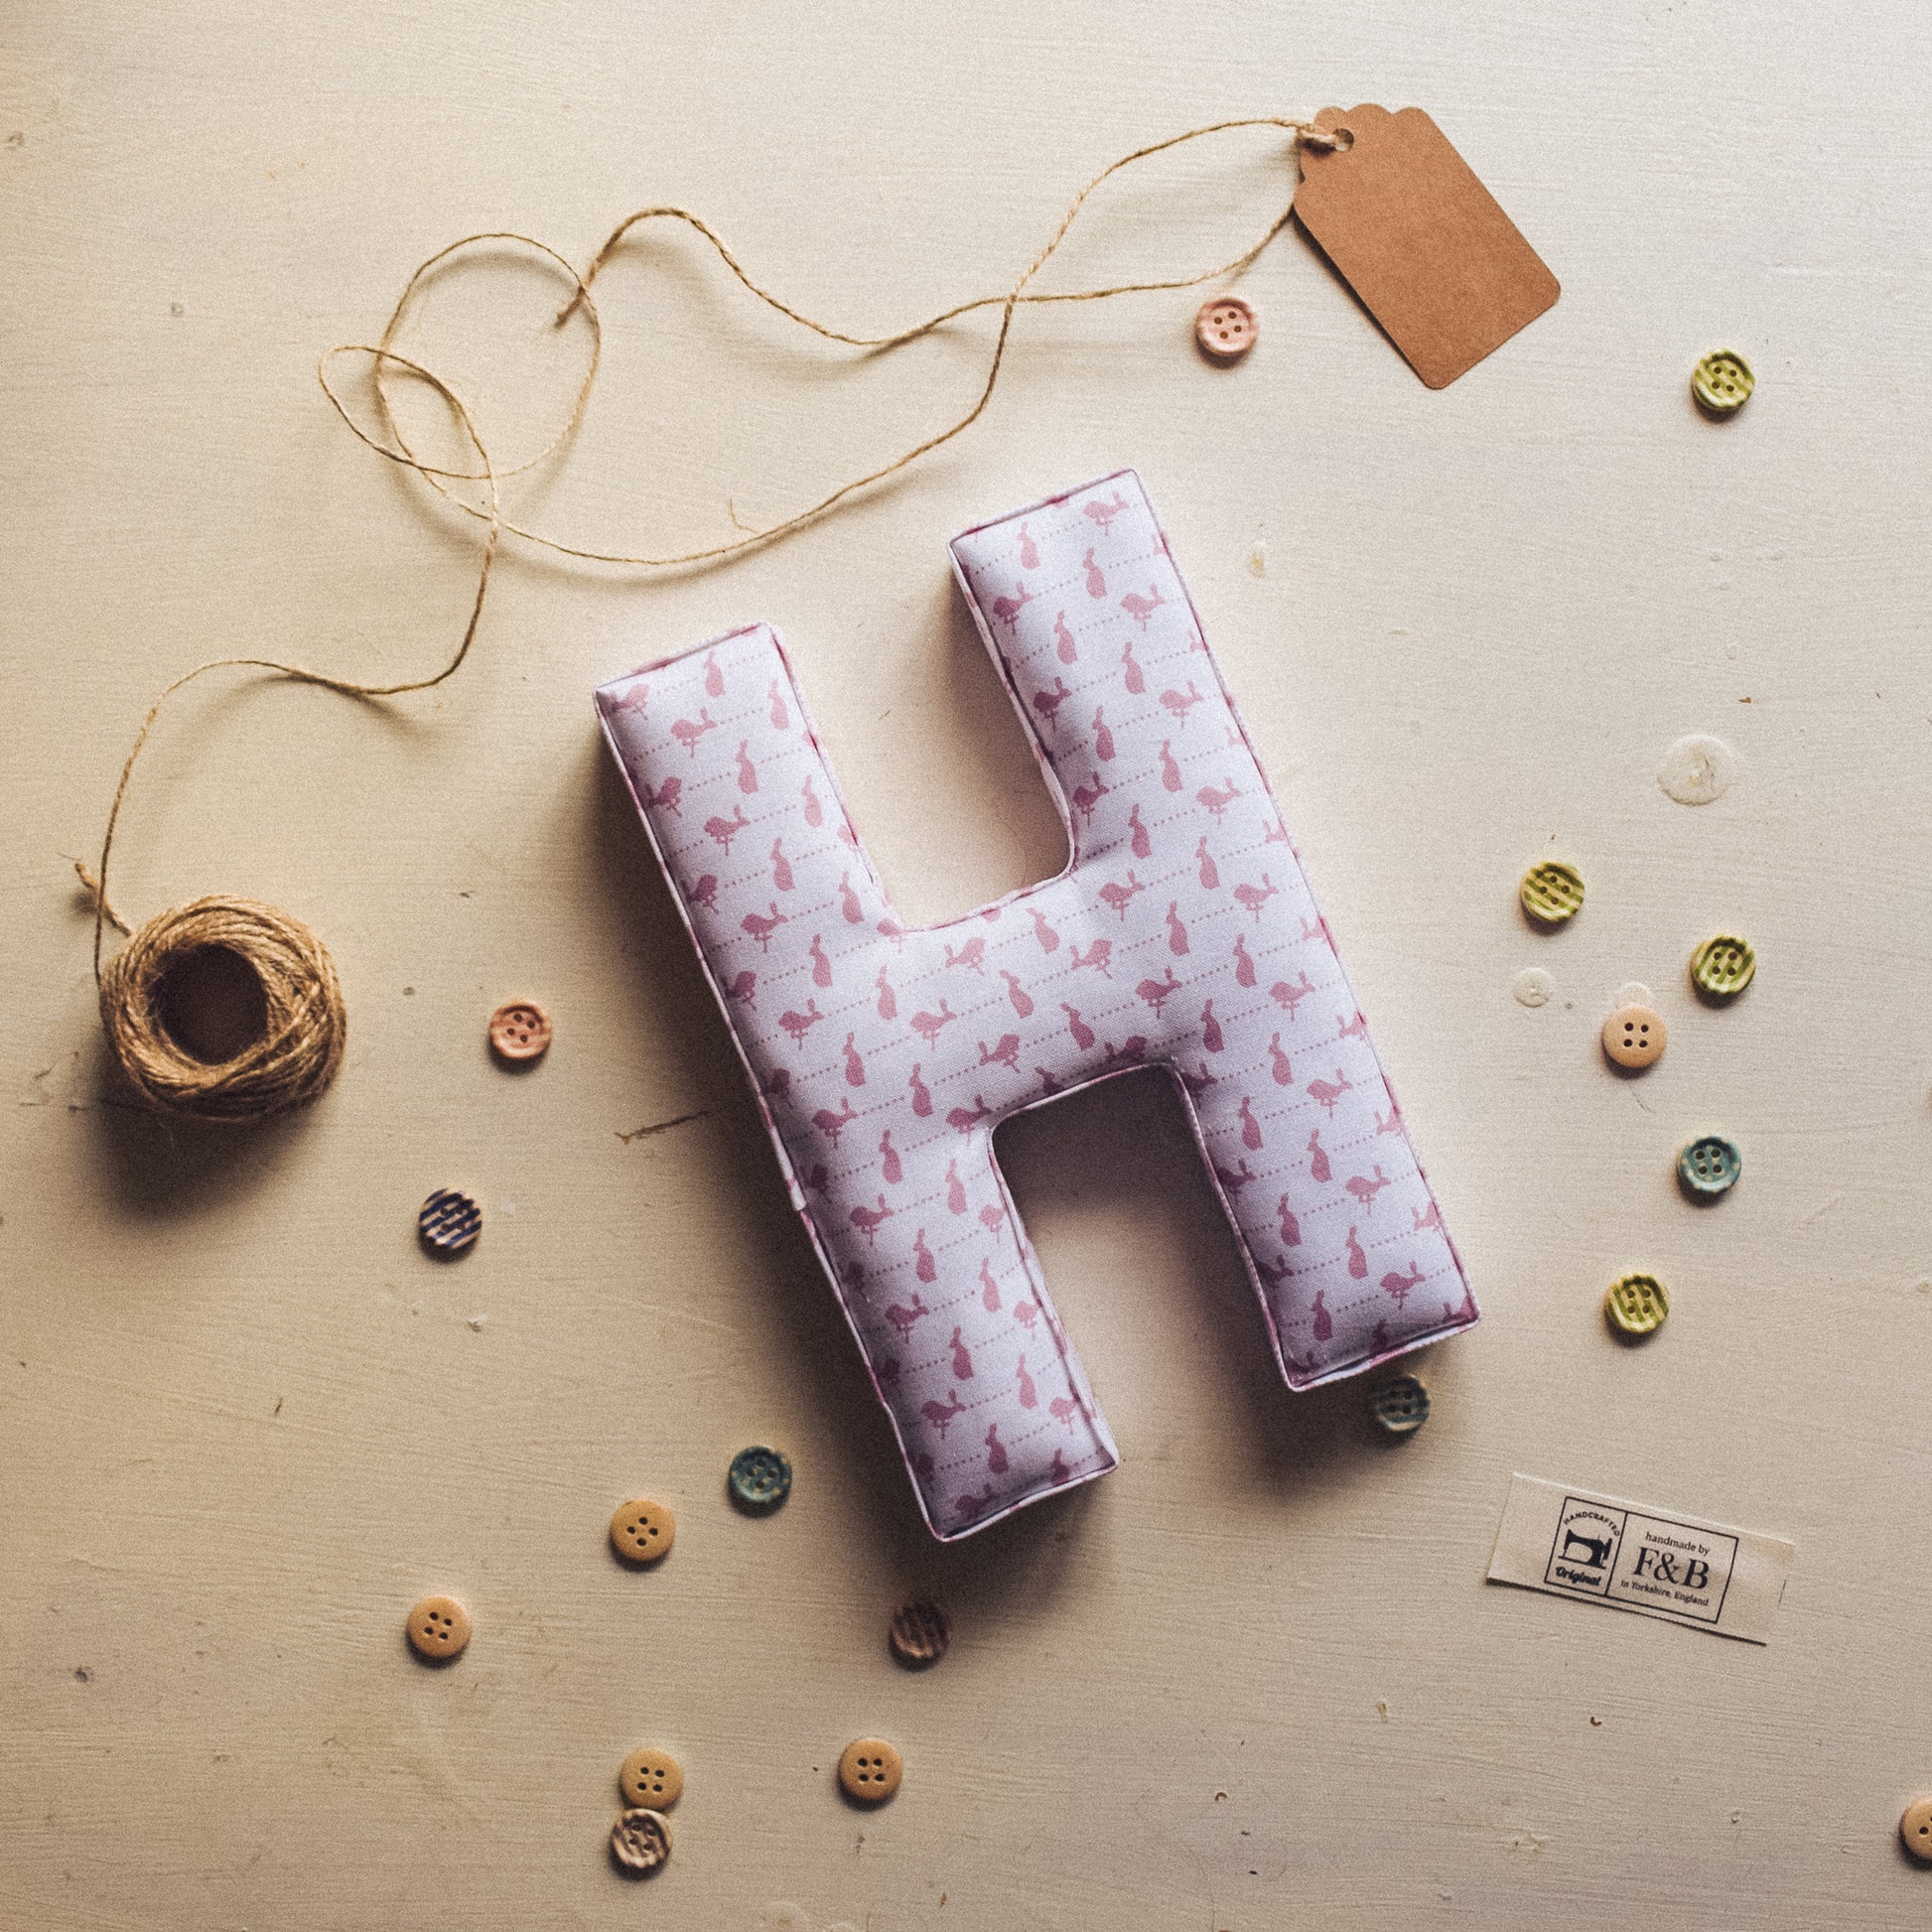 Handmade Fabric Letters by F&B - Handmade in Yorkshire